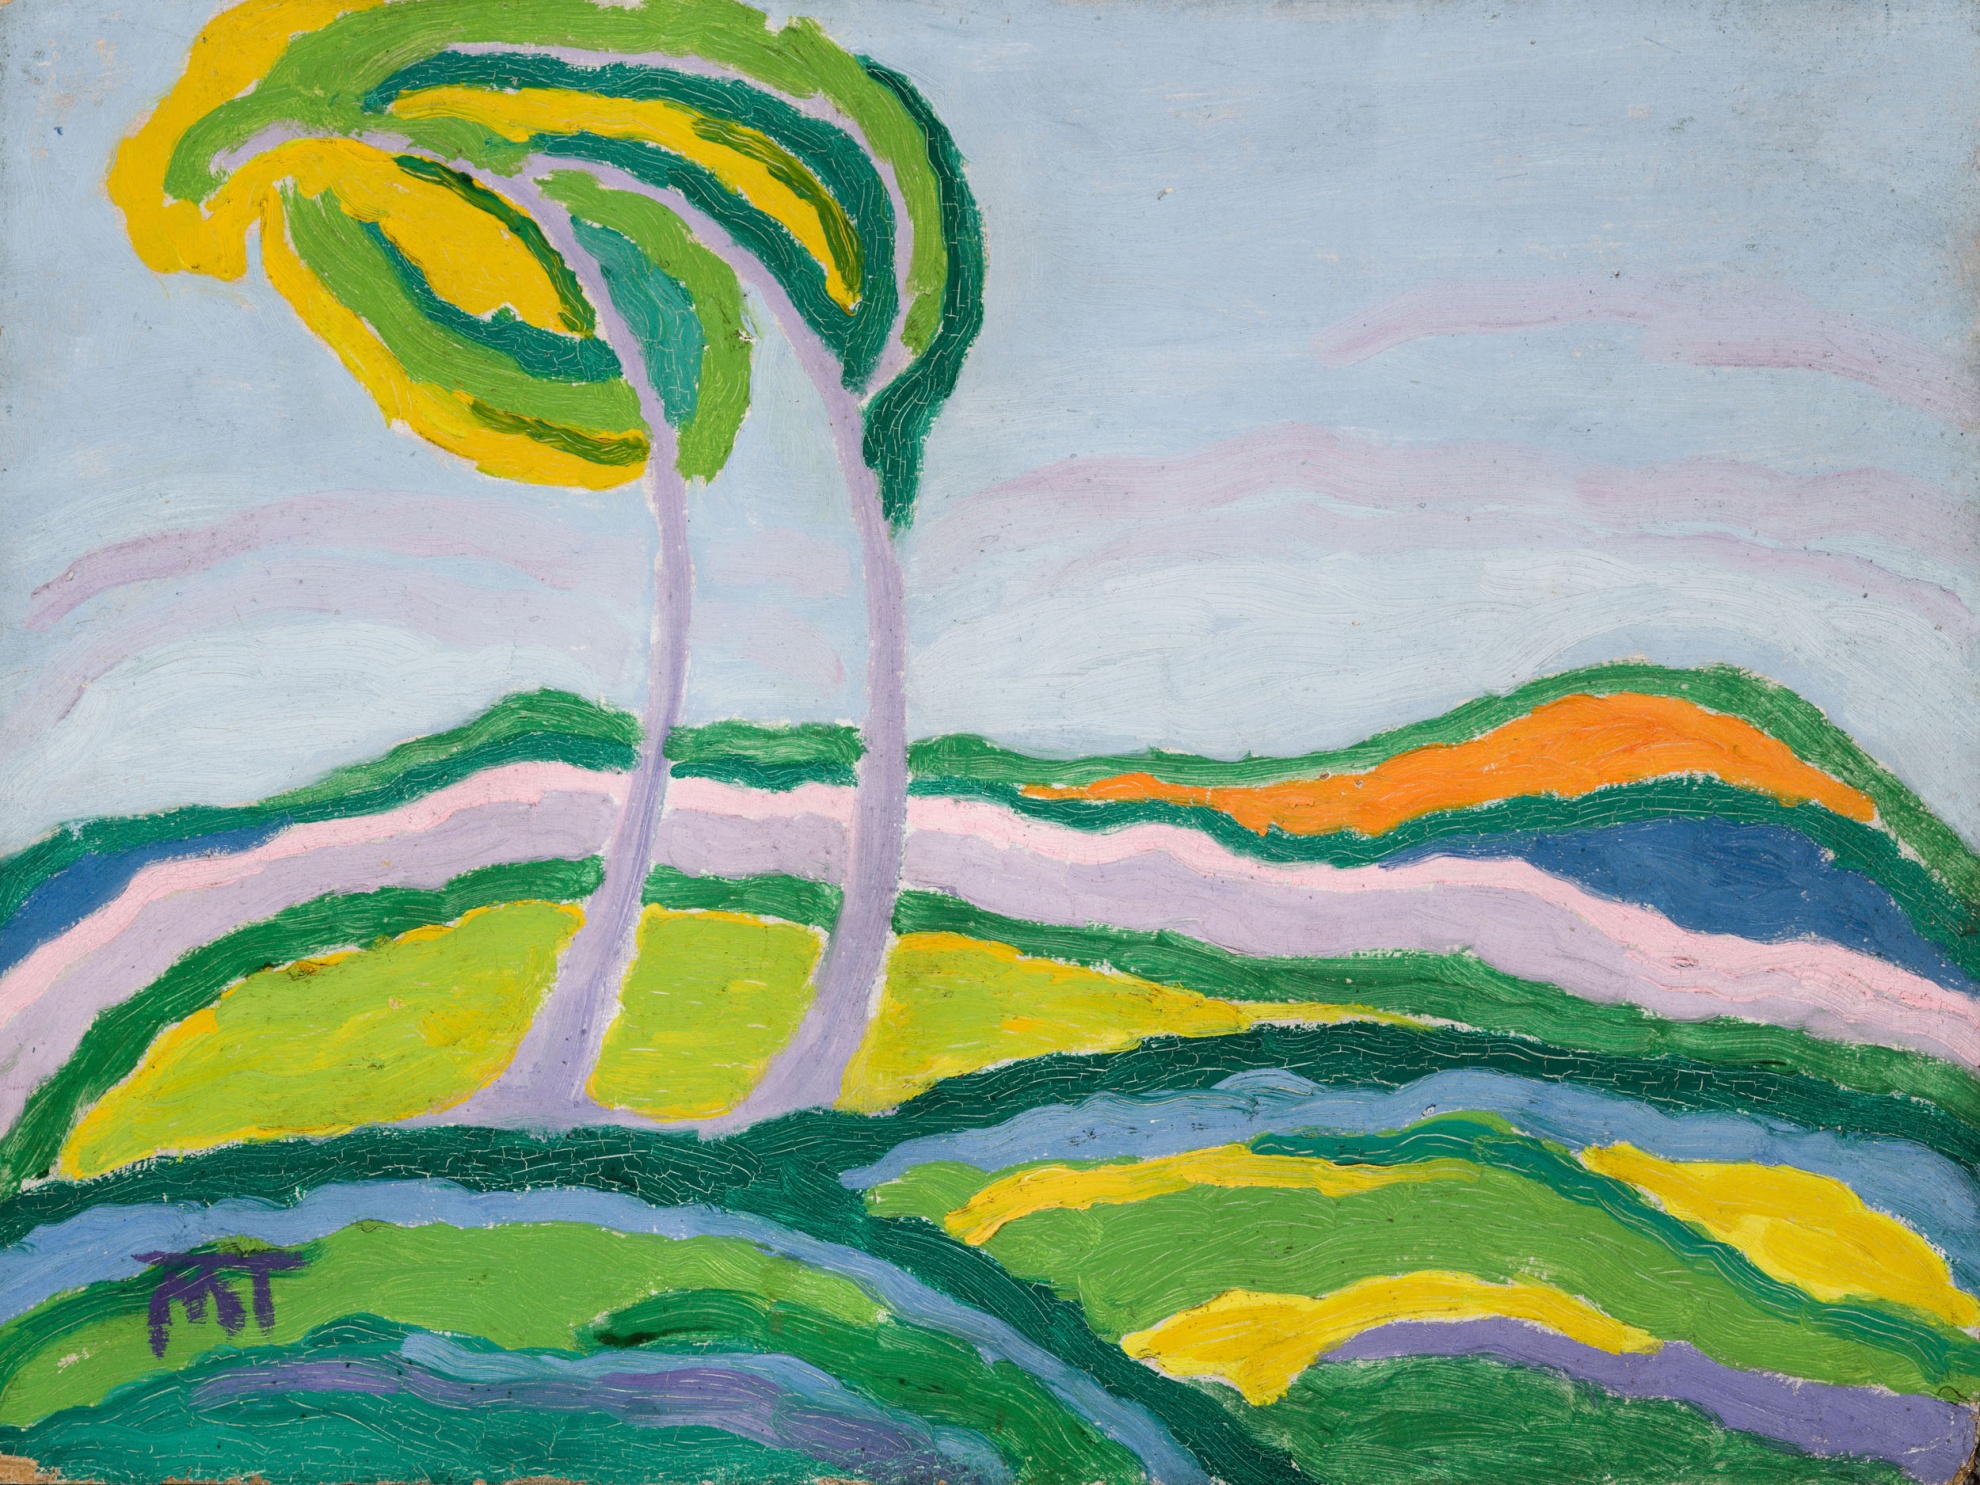 untitled (landscape with hills and trees)

(The Salgo Trust for Education CC BY-NC-SA)